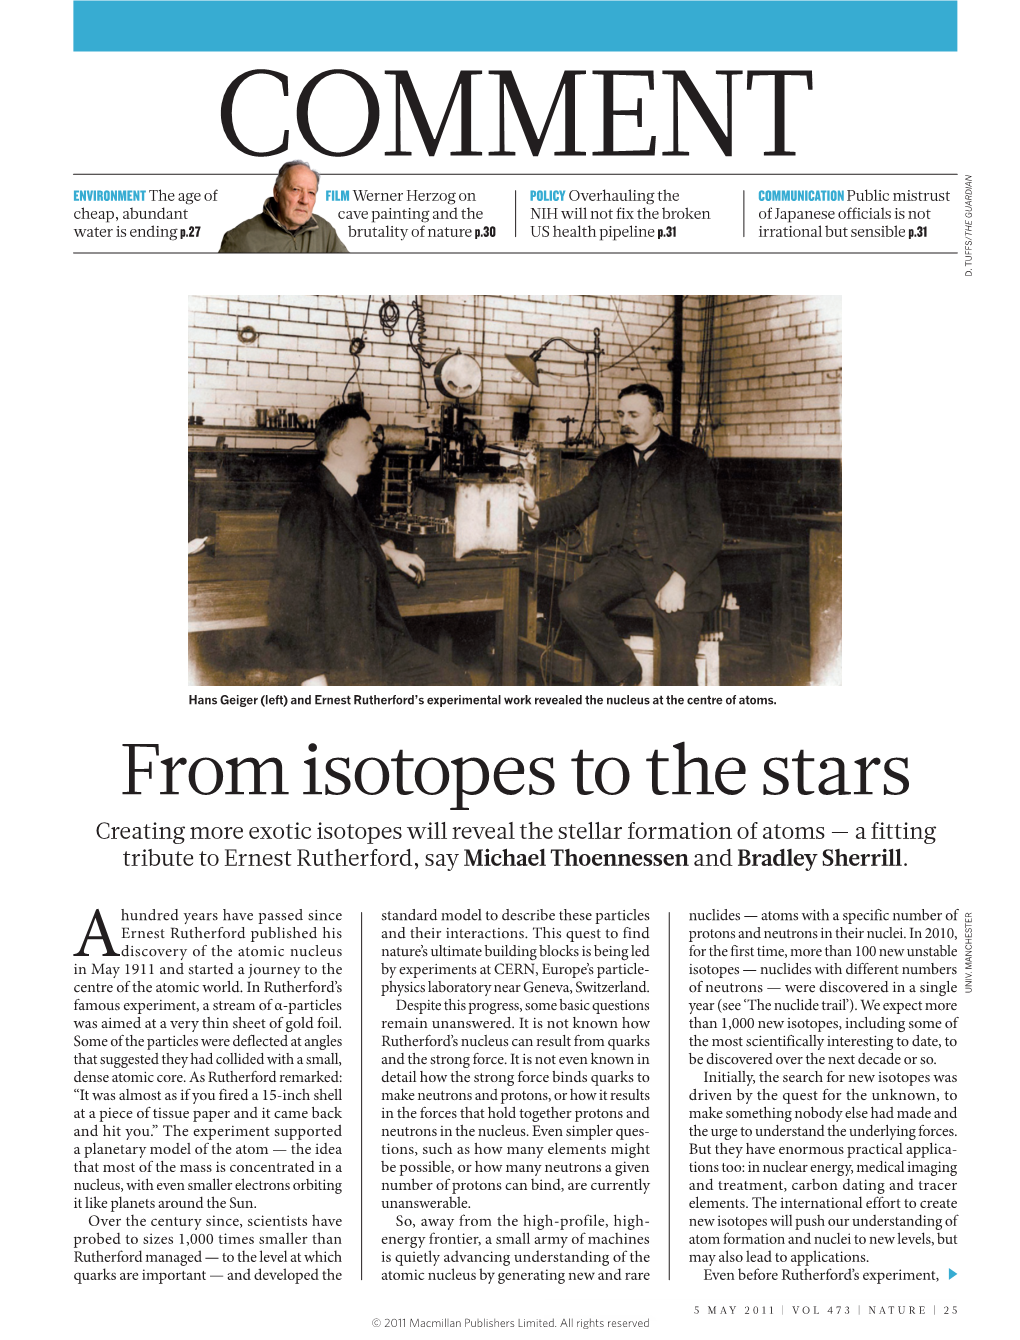 From Isotopes to the Stars